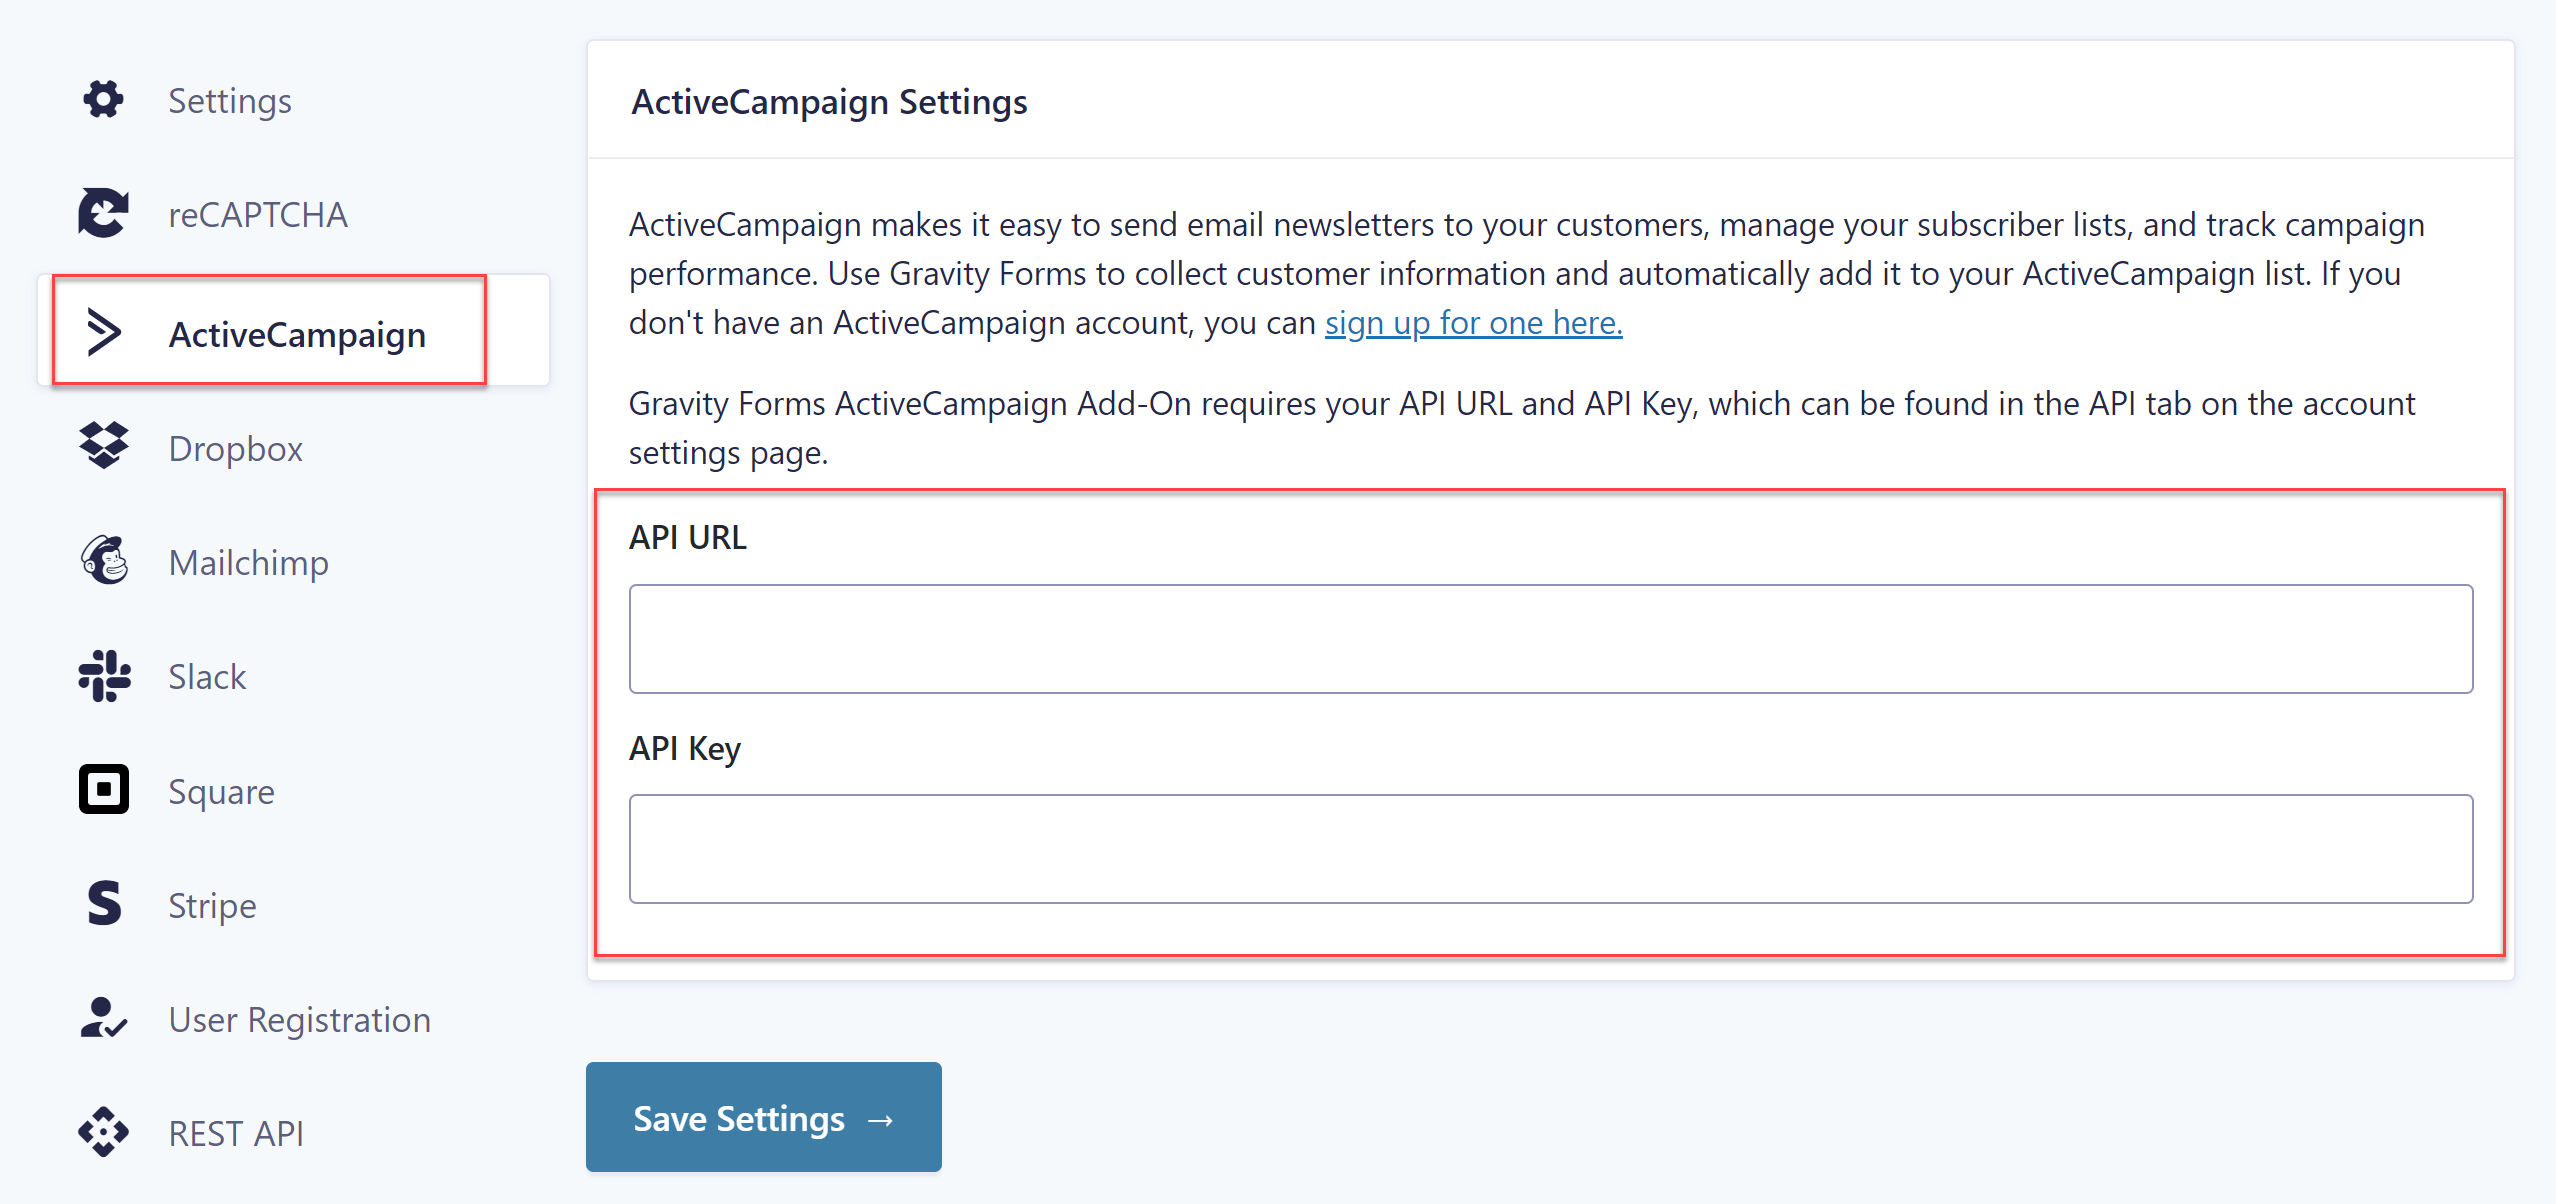 ActiveCampaign Settings